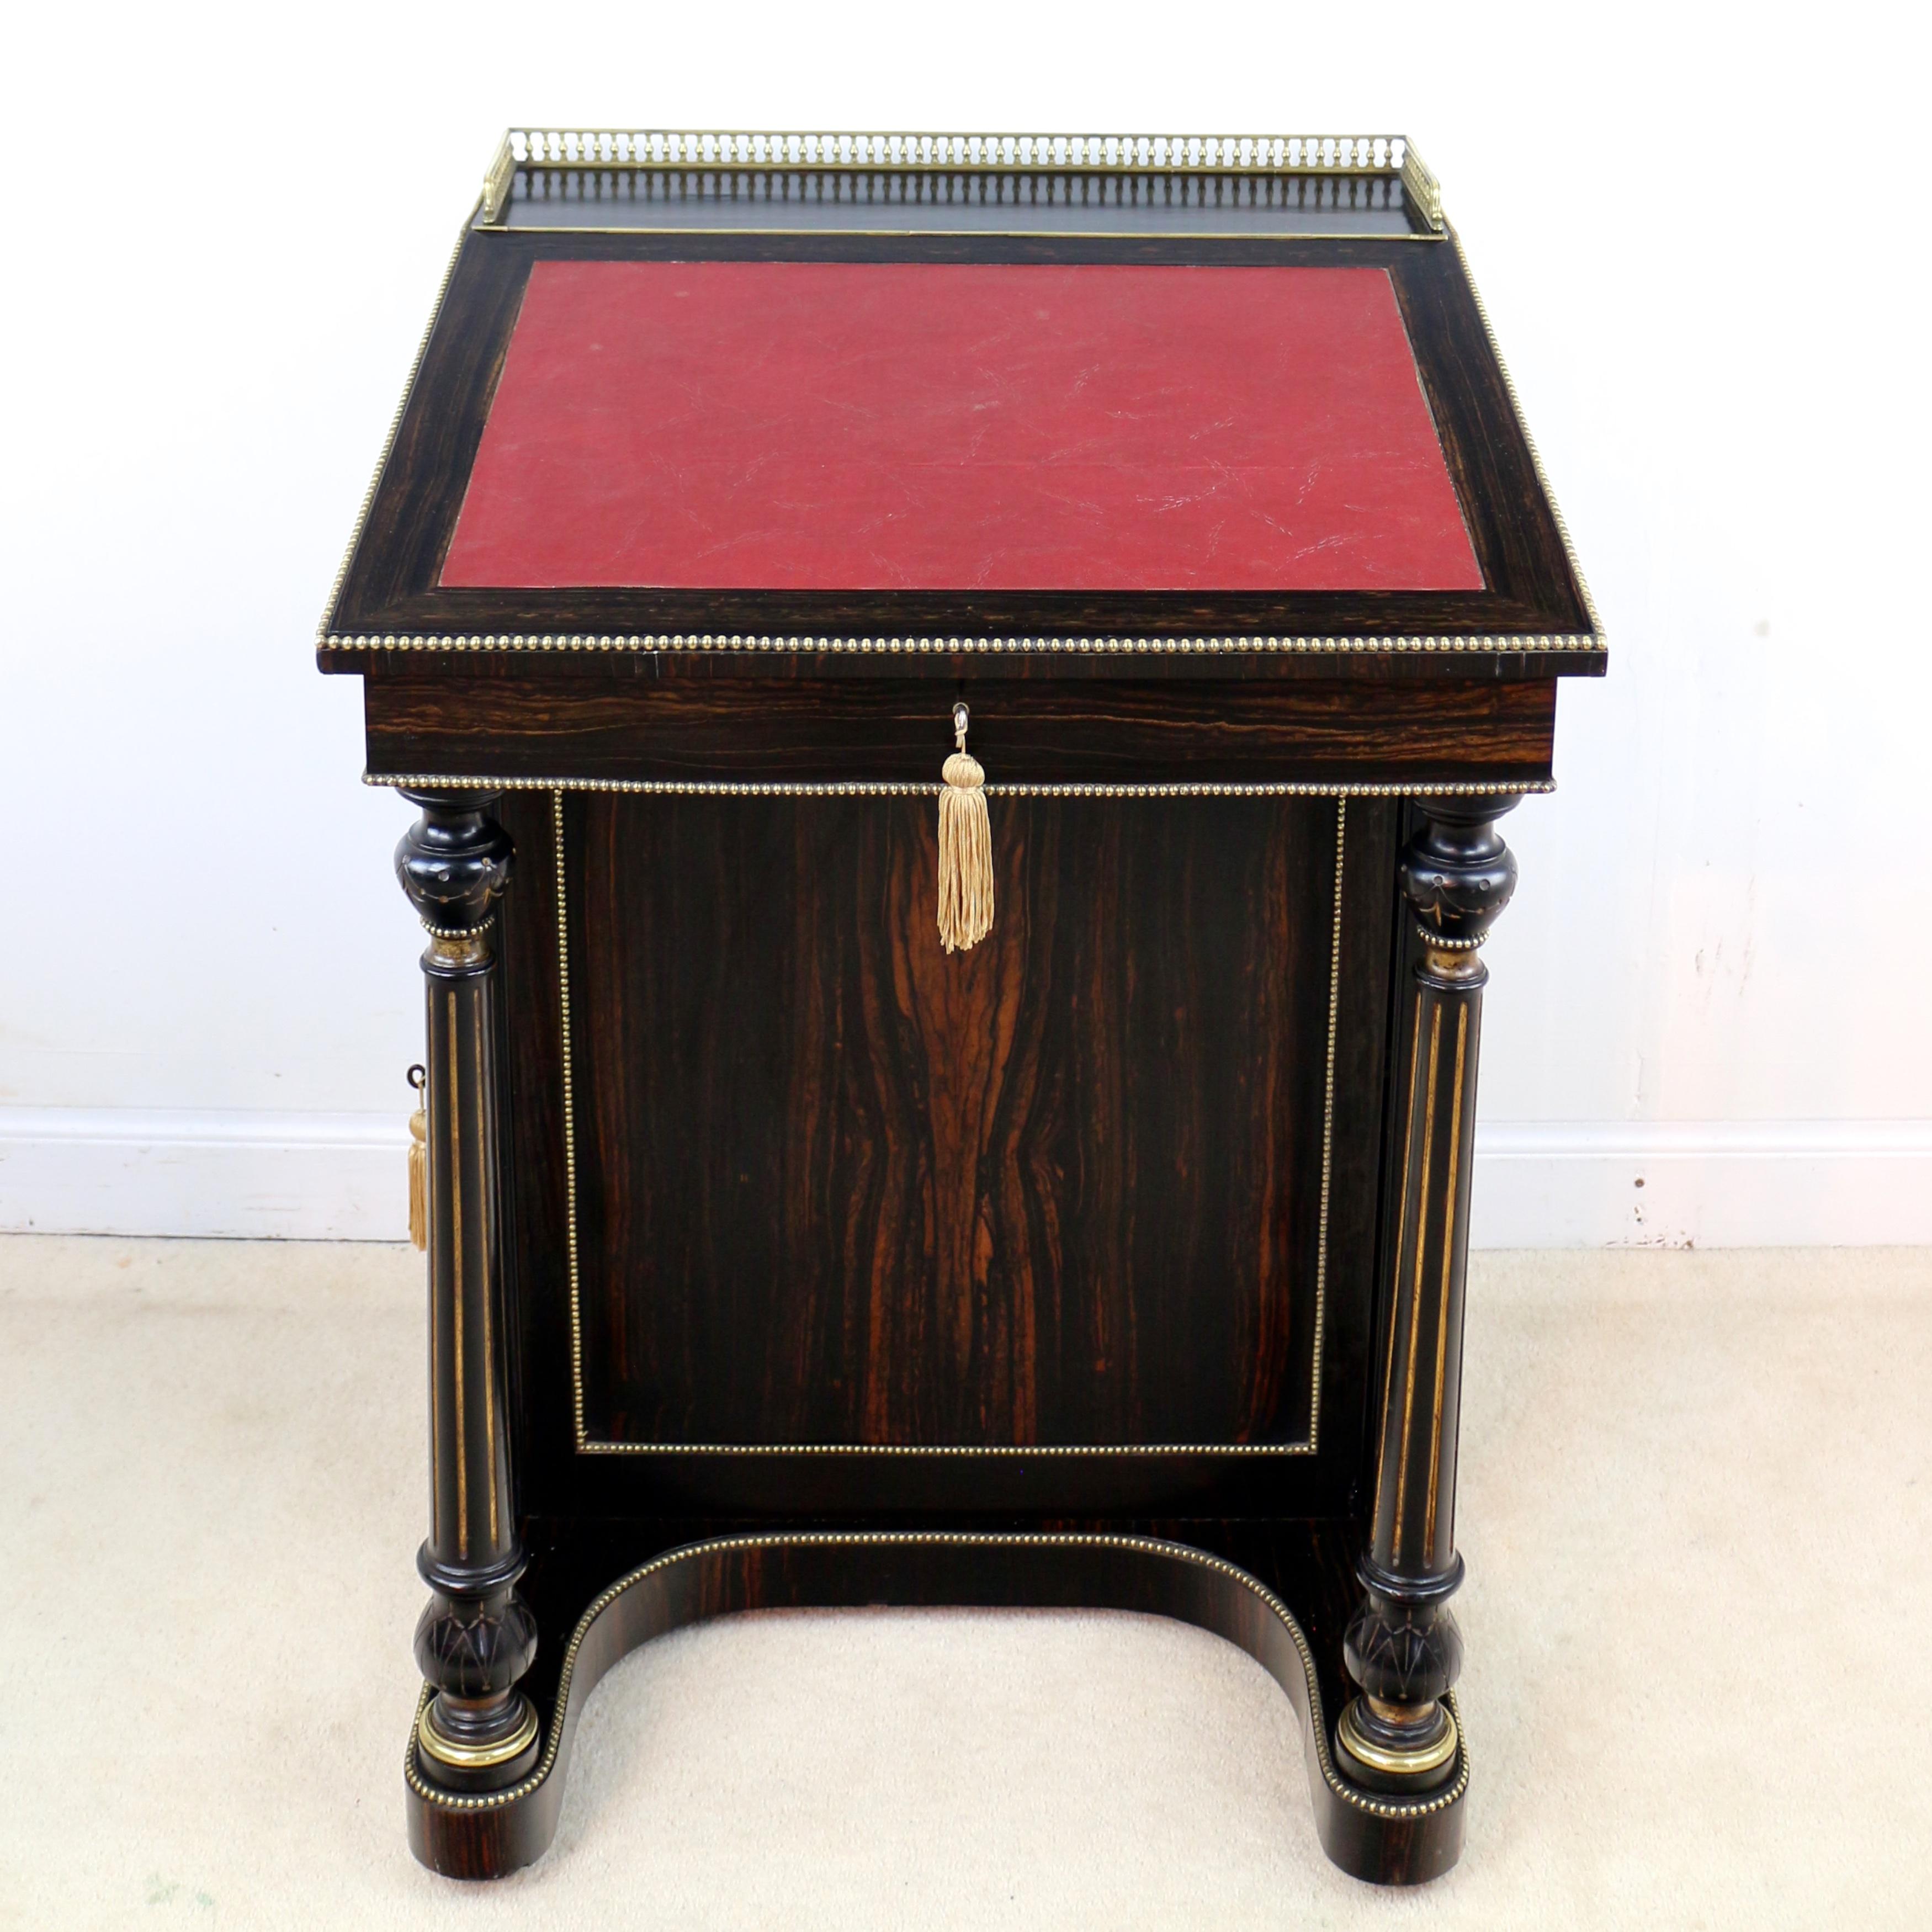 A rare 19th century Coromandel davenport by Edwards & Roberts of London. Featuring beautiful dark Coromandel veneers to each side highlighted with brass beading and turned and fluted gilt decorated ebonized columns. The top with a brass gallery and